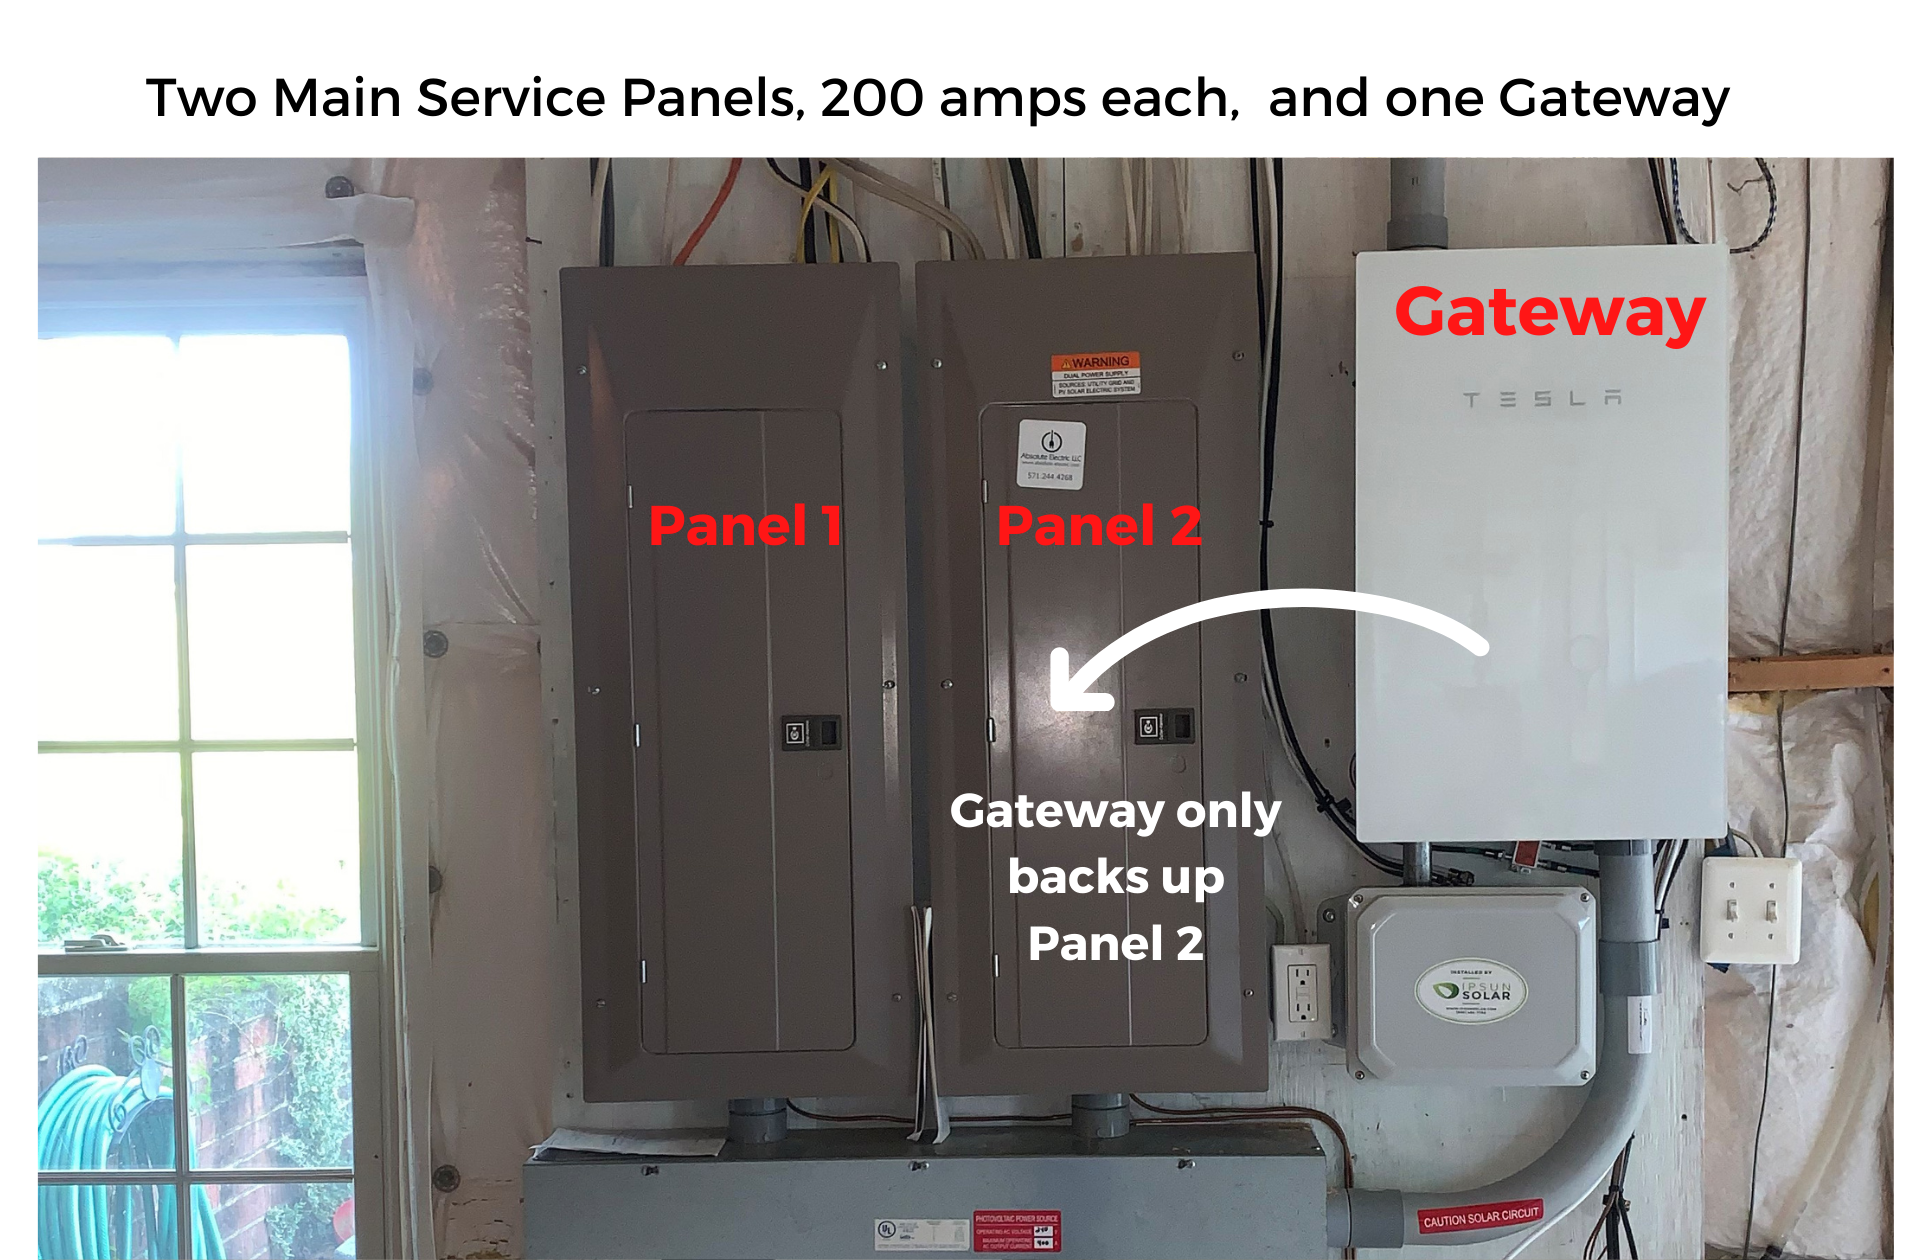 One Gateway and Two Main Service Panels